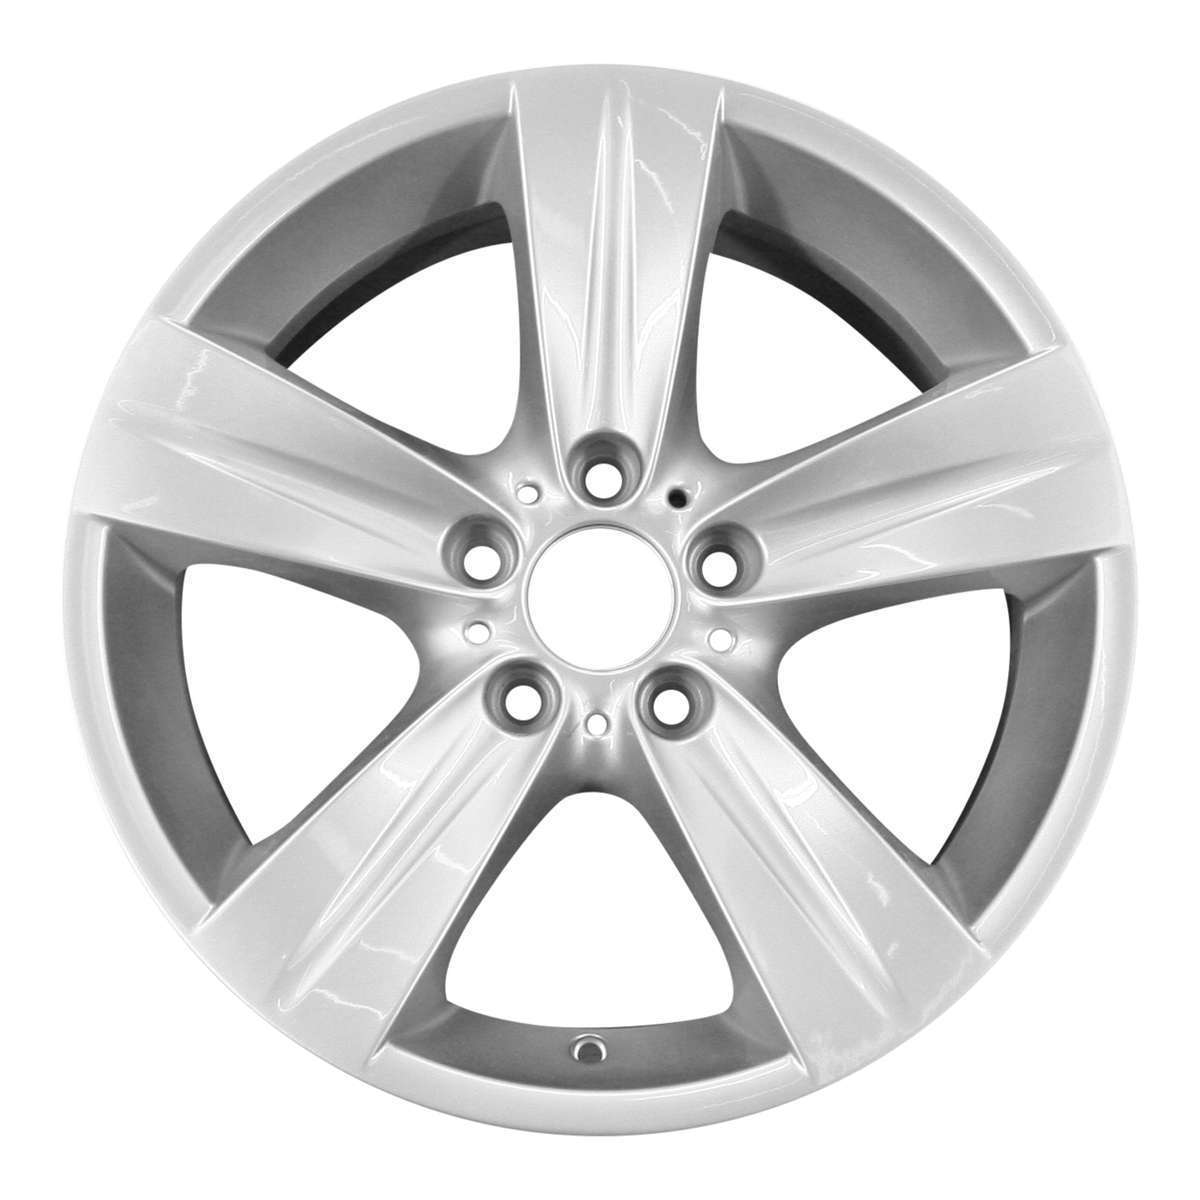 2011 BMW 328i New 18" Front Replacement Wheel Rim RW59617S